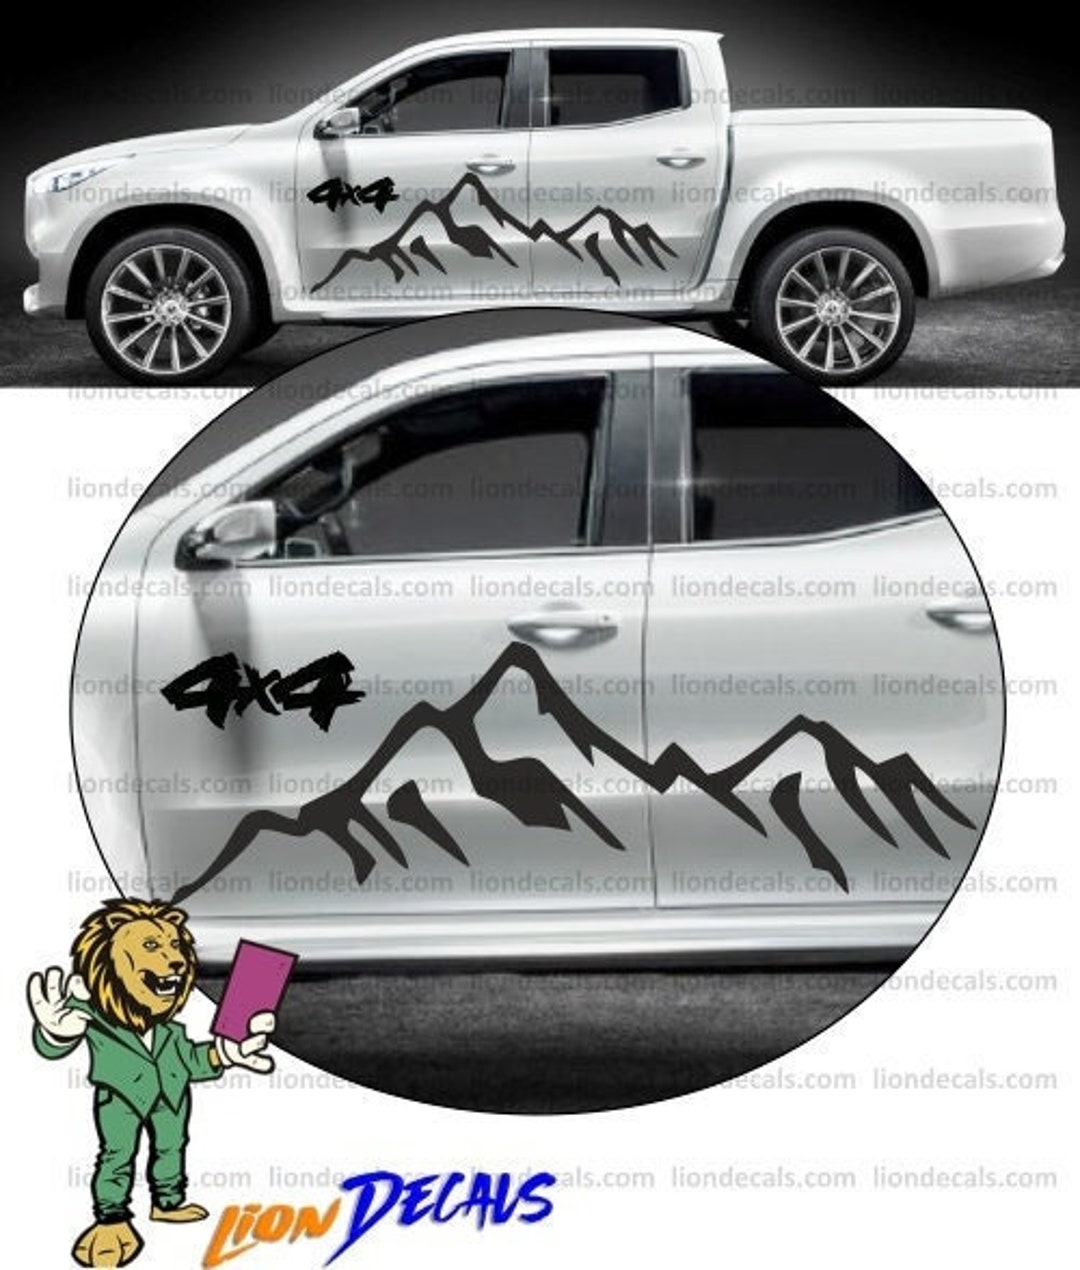 4x4 Mountain Off Road Pick-up Side Sticker. Berge Off Road Aufkleber.  100x100 Off Road Sticker -  Schweiz